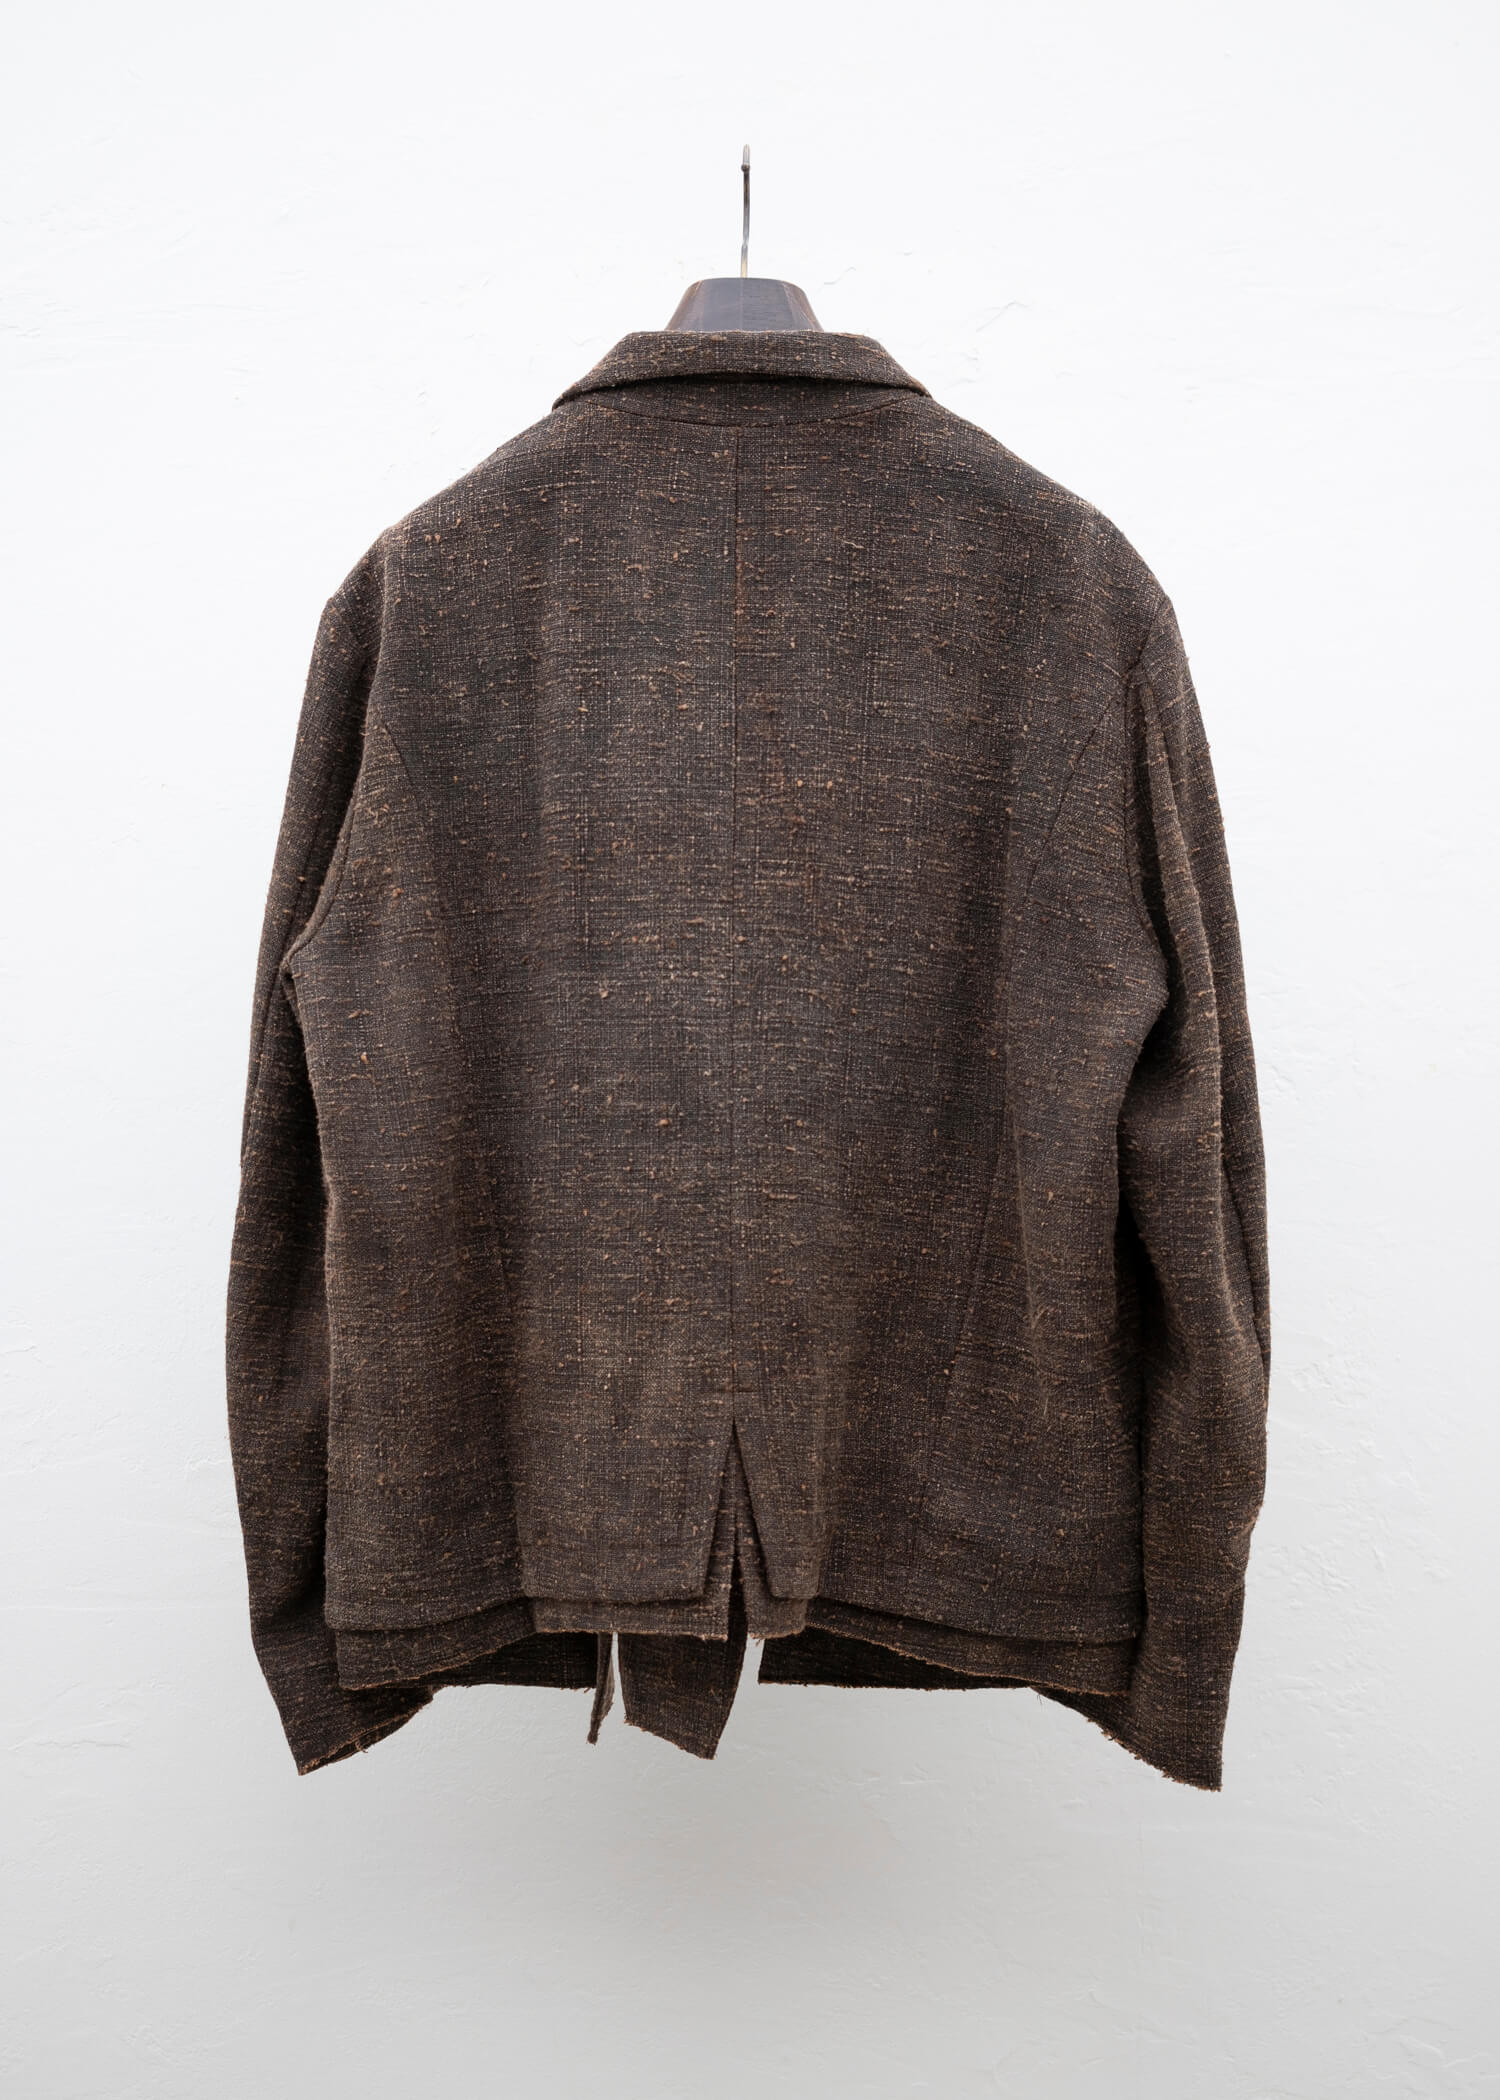 Professor.E Double Layer Blazer / Natural Dyed Brown